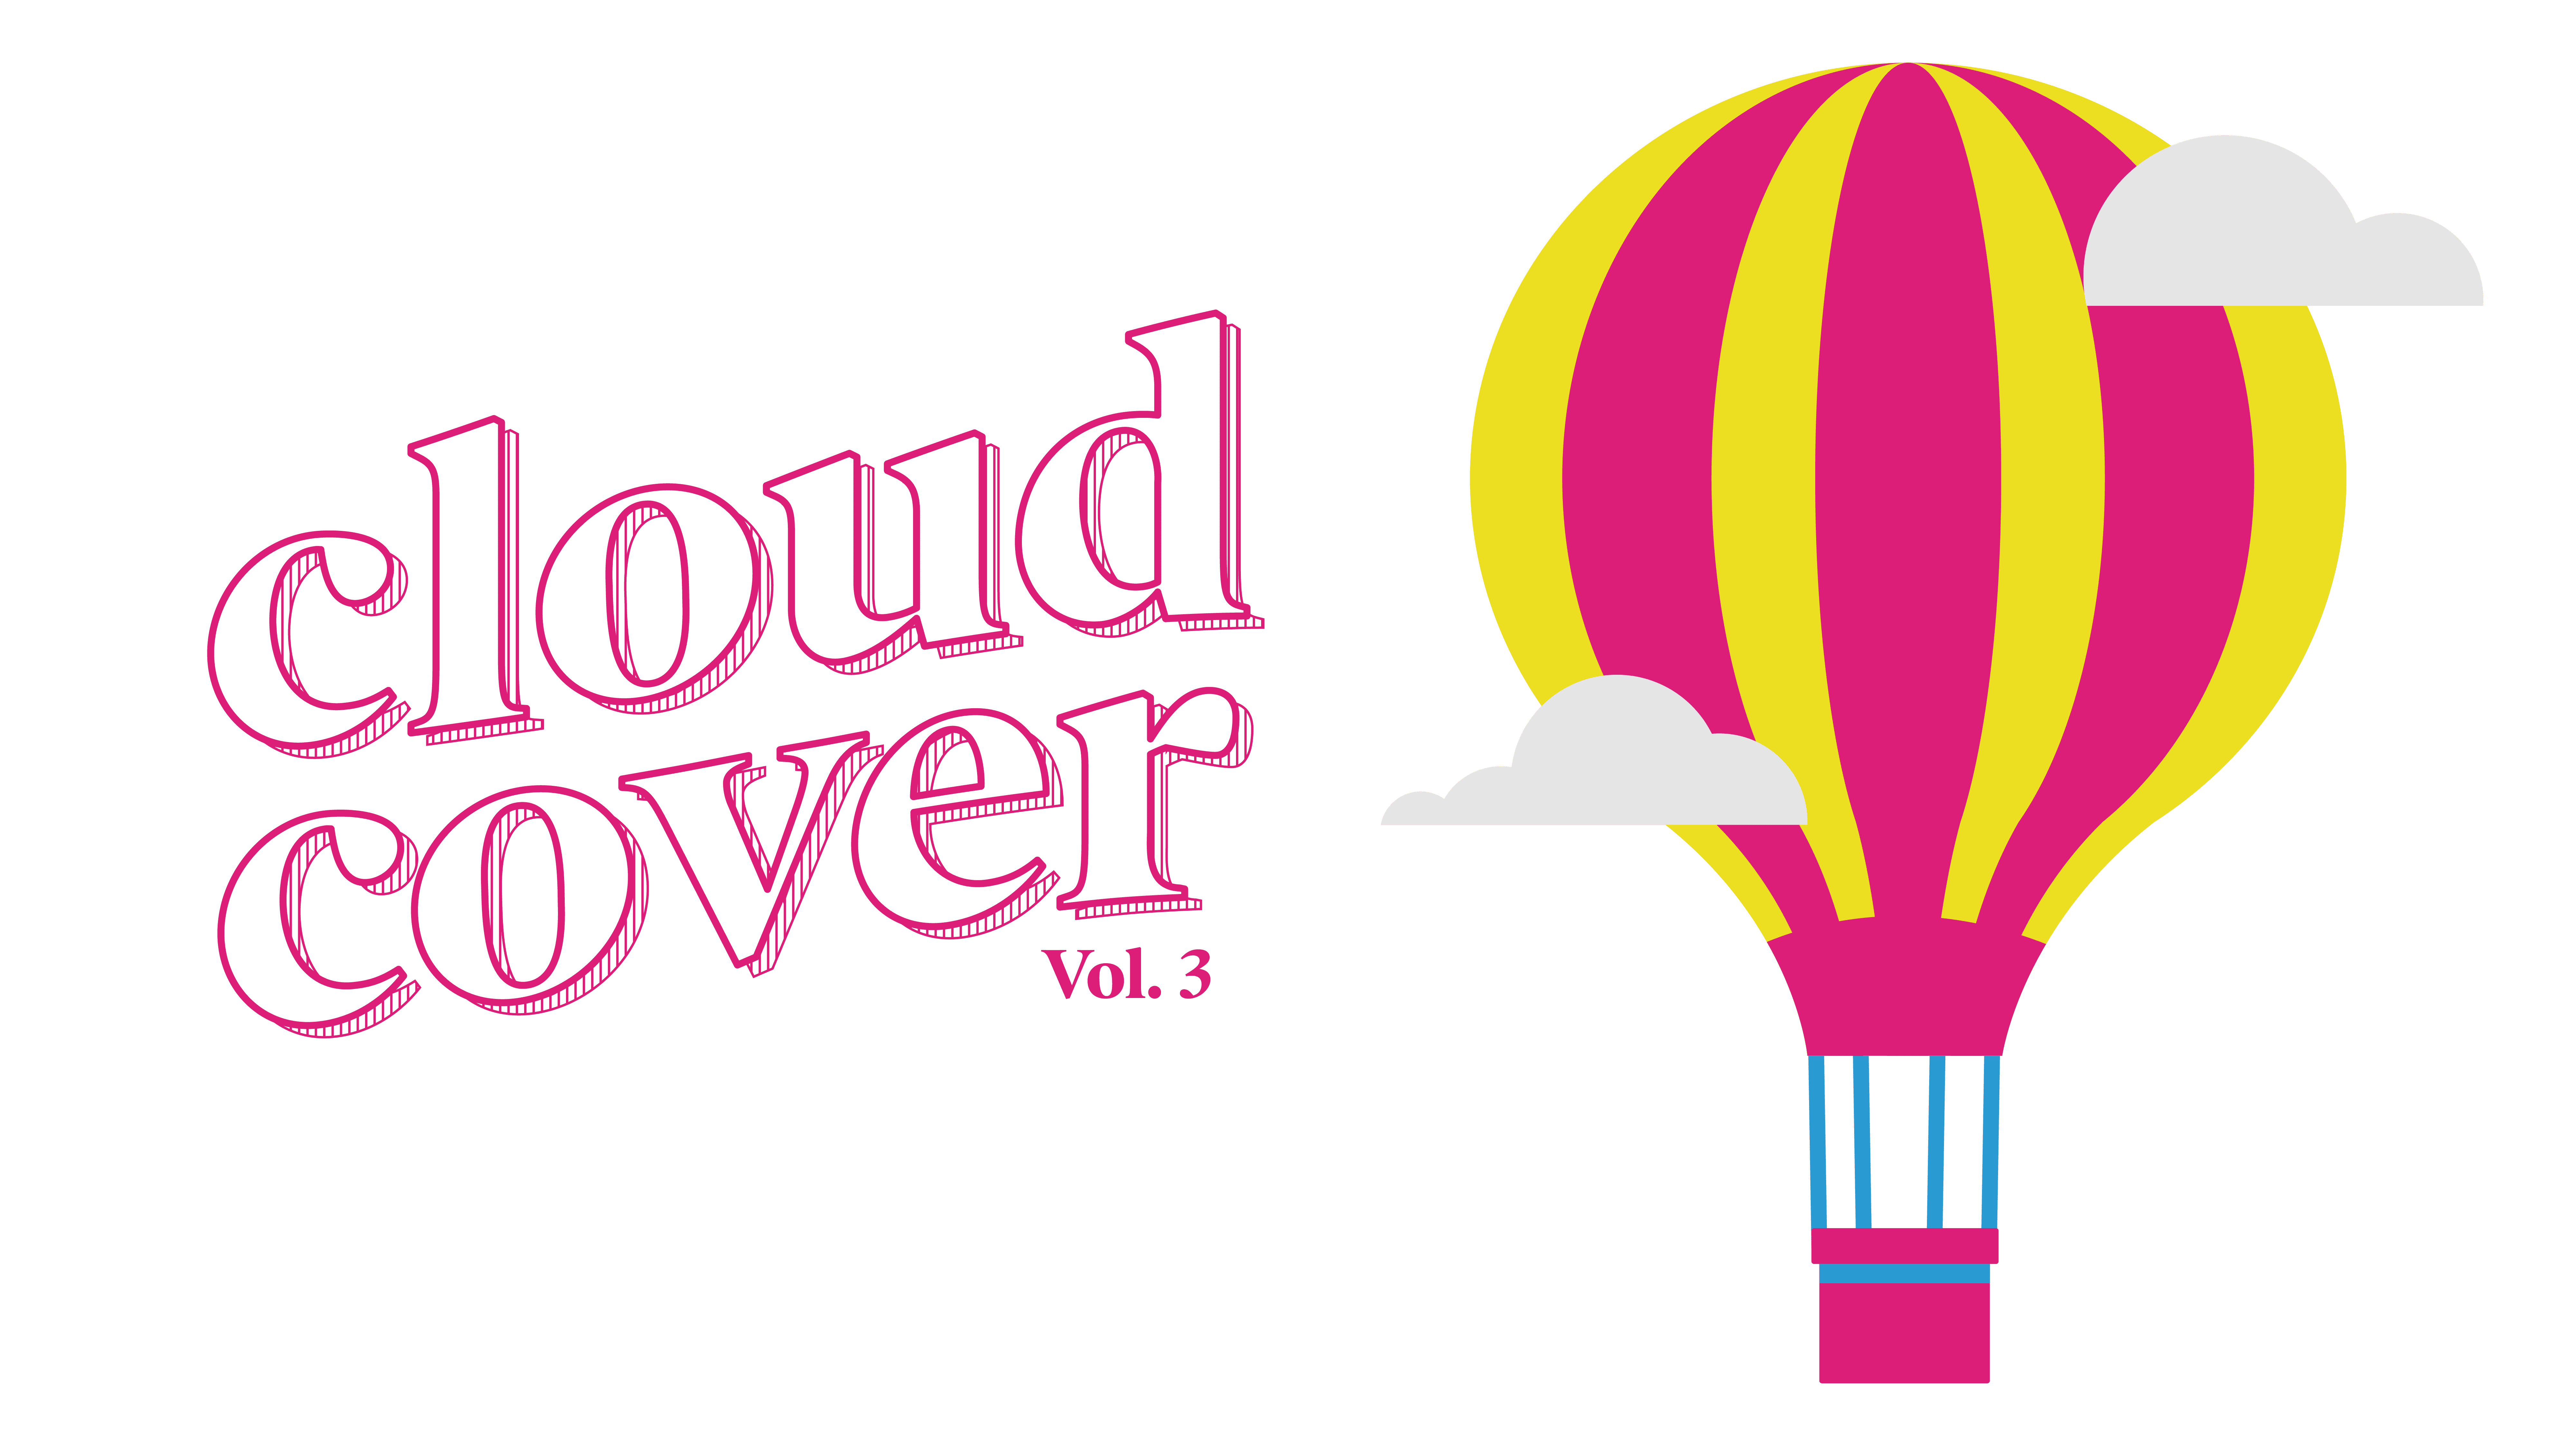 hot air balloon with the title cloud cover vol. 4